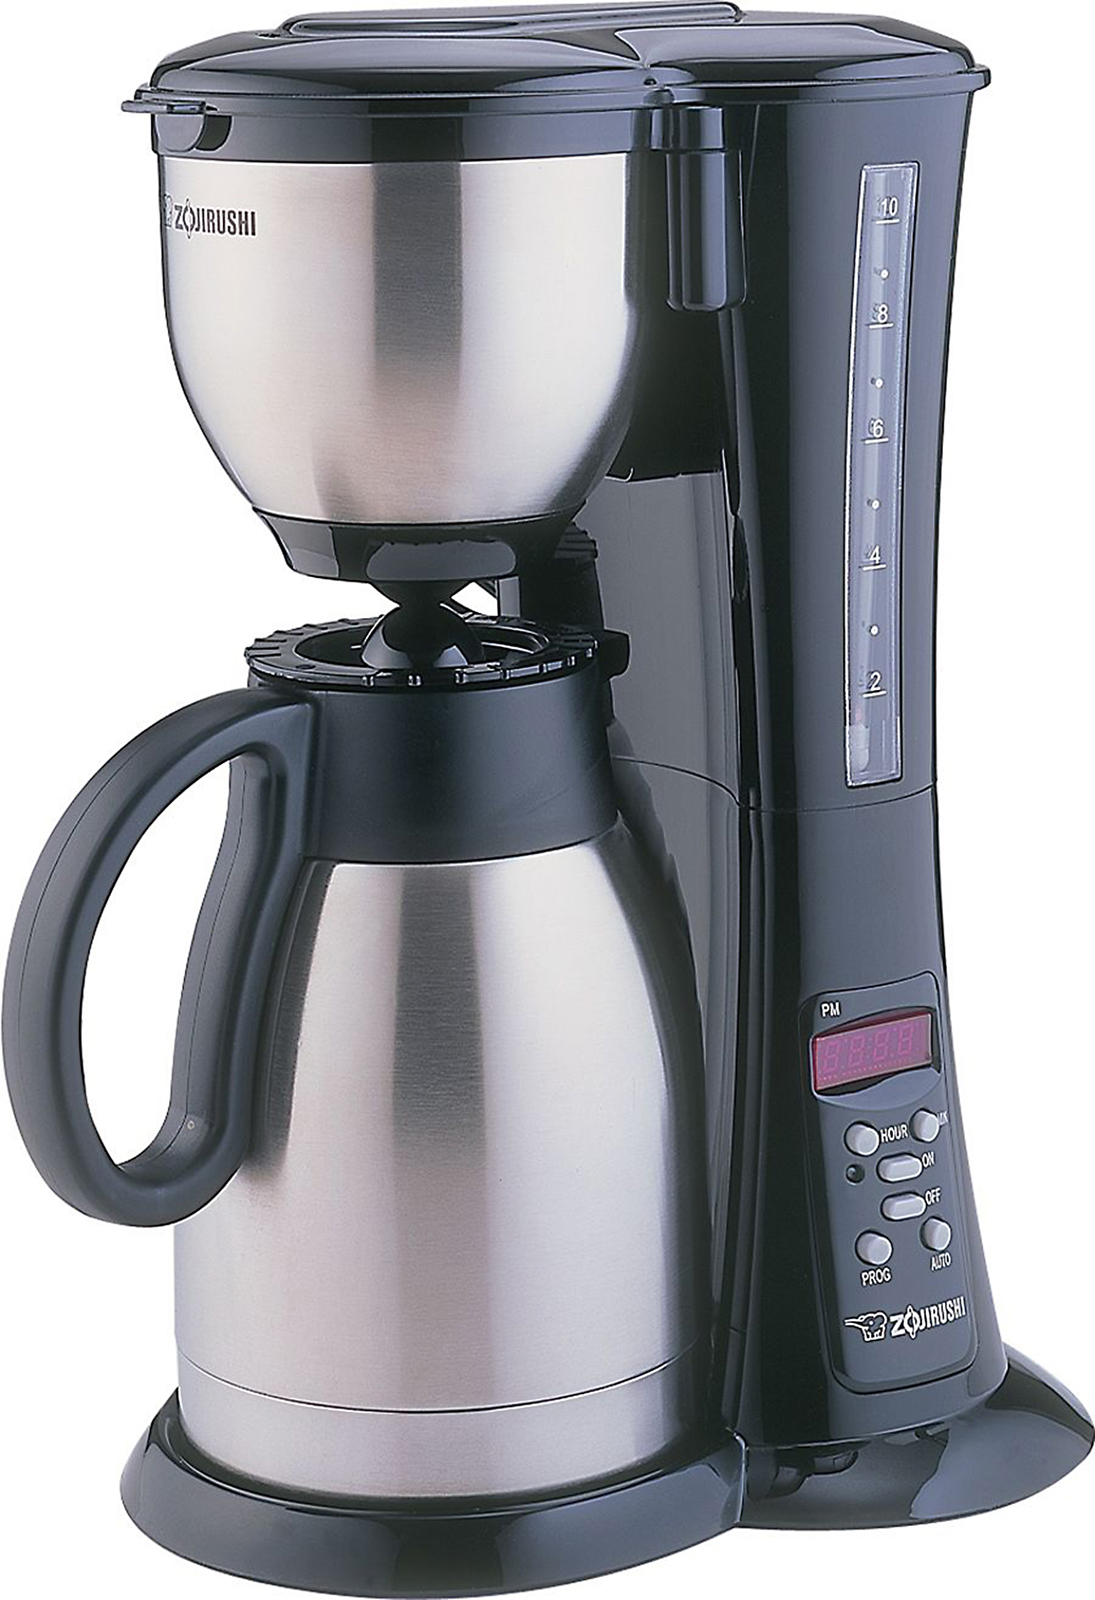 8-Cup Fresh Brew Thermal Carafe Coffee Maker - Stainless Steel